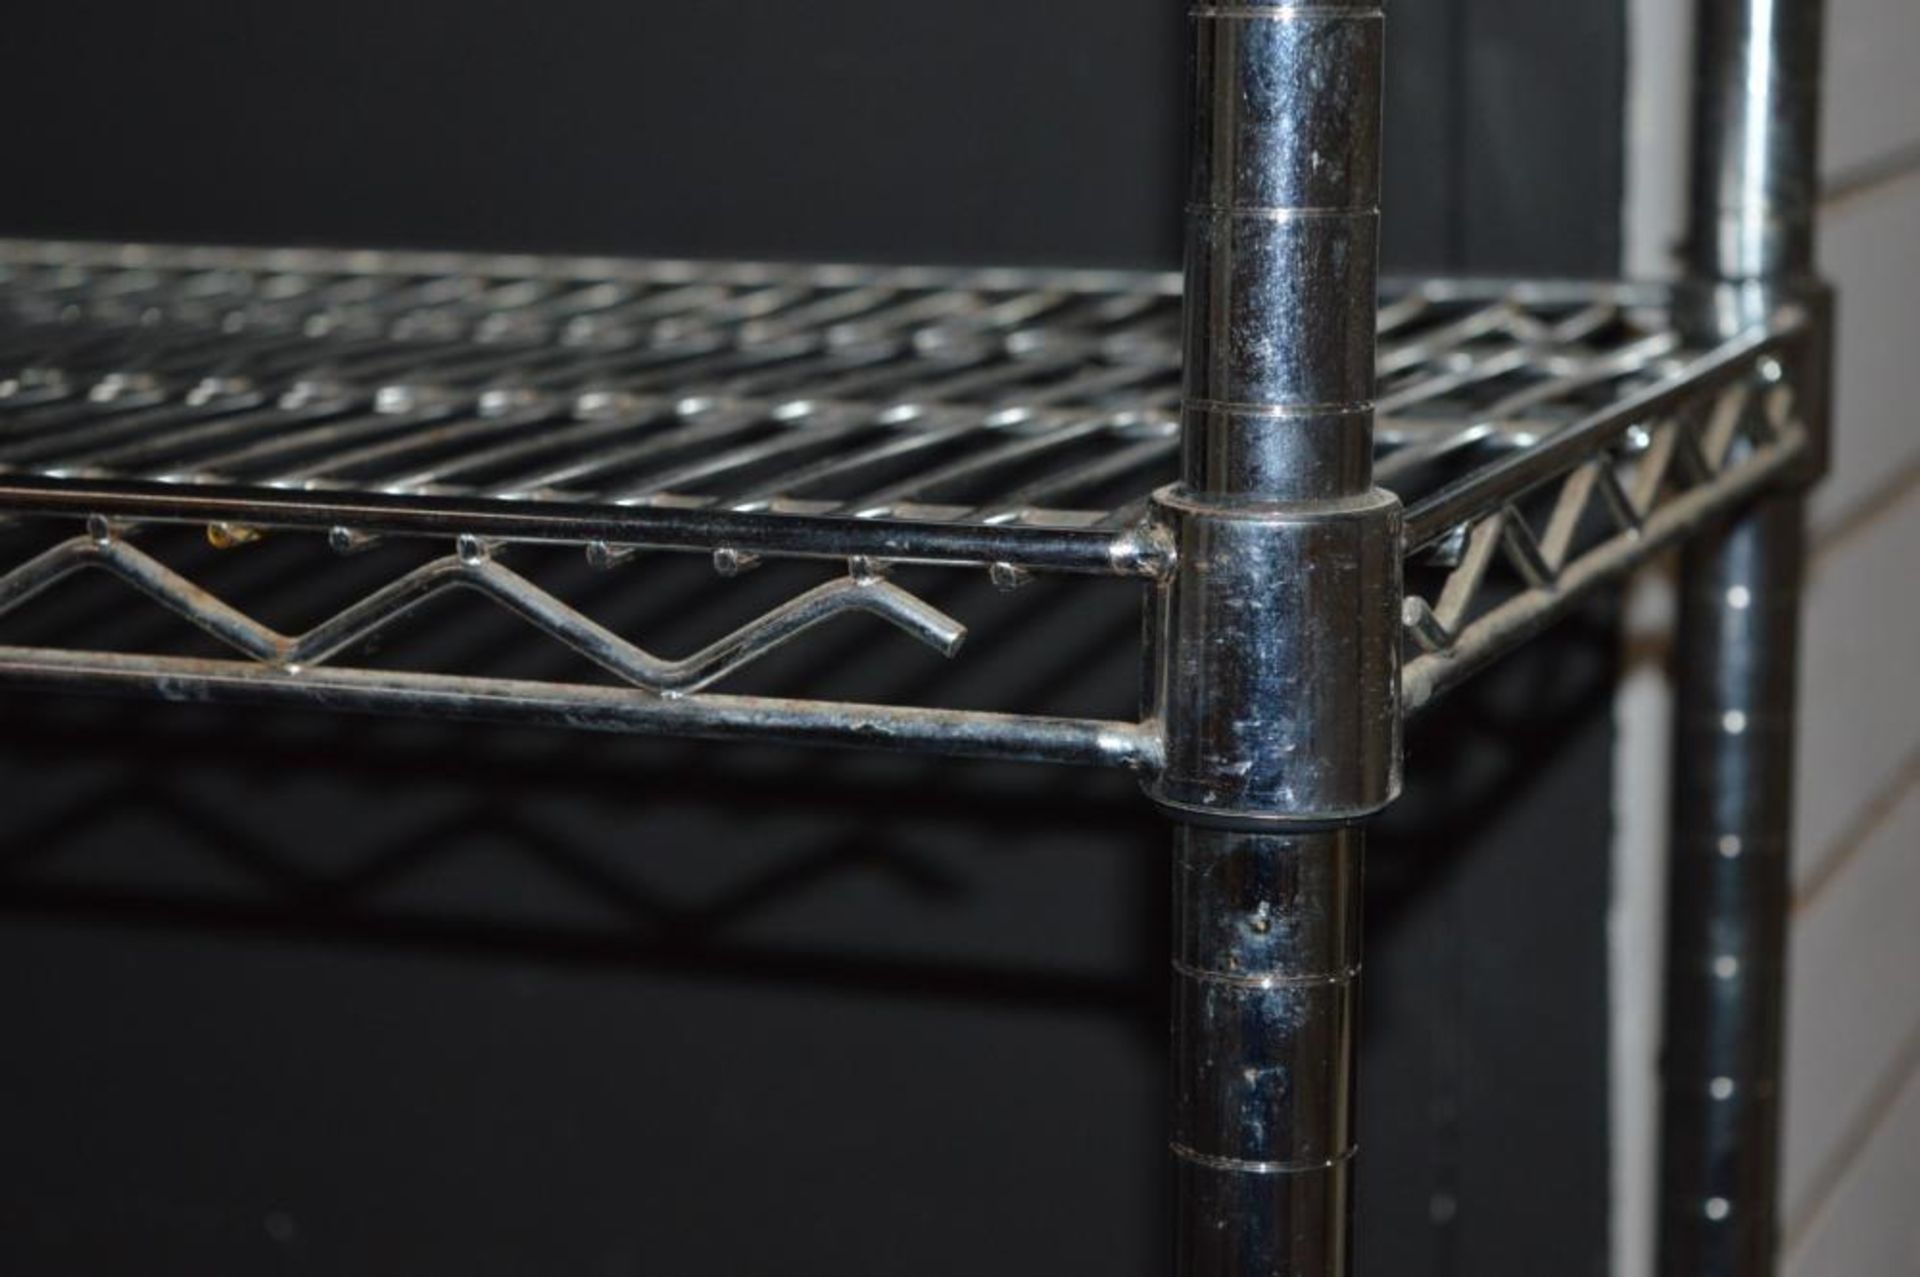 1 x Four Tier Commercial Kitchen Wire Shelving Rack - H185 x W153 x D46 cms - Used For None Food Sto - Image 2 of 3